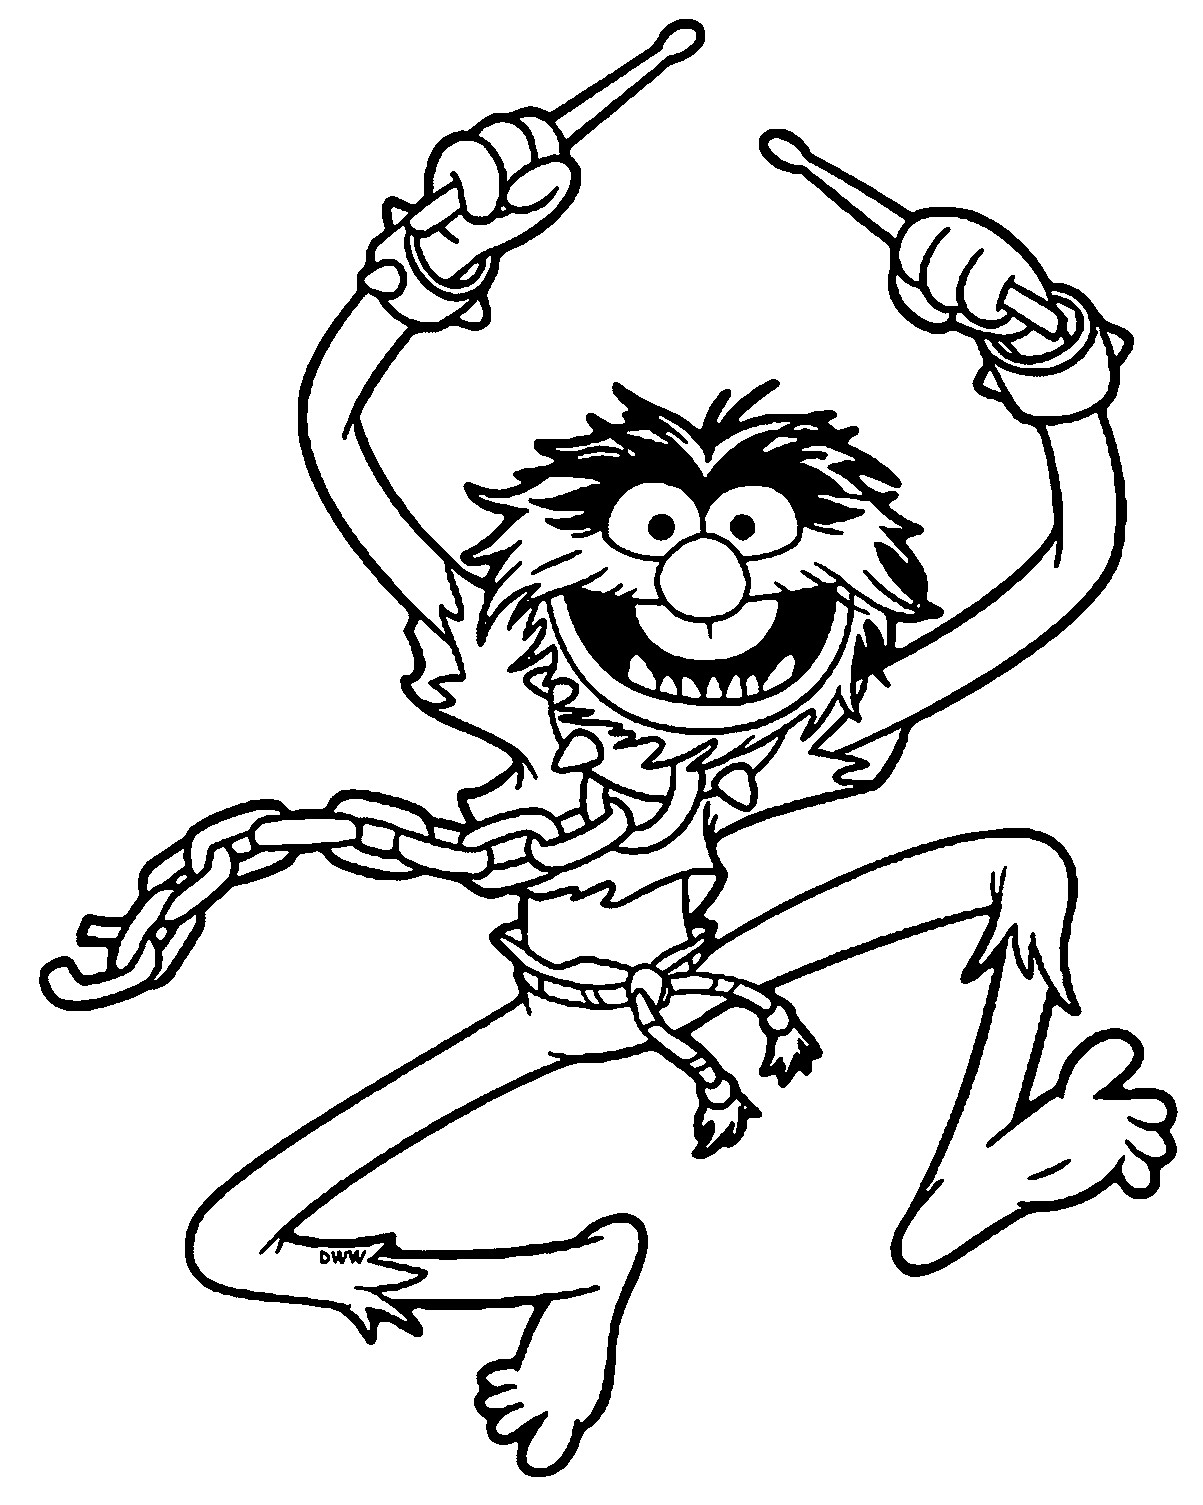 Muppets Coloring Book Pages
 The Muppets Coloring Pages